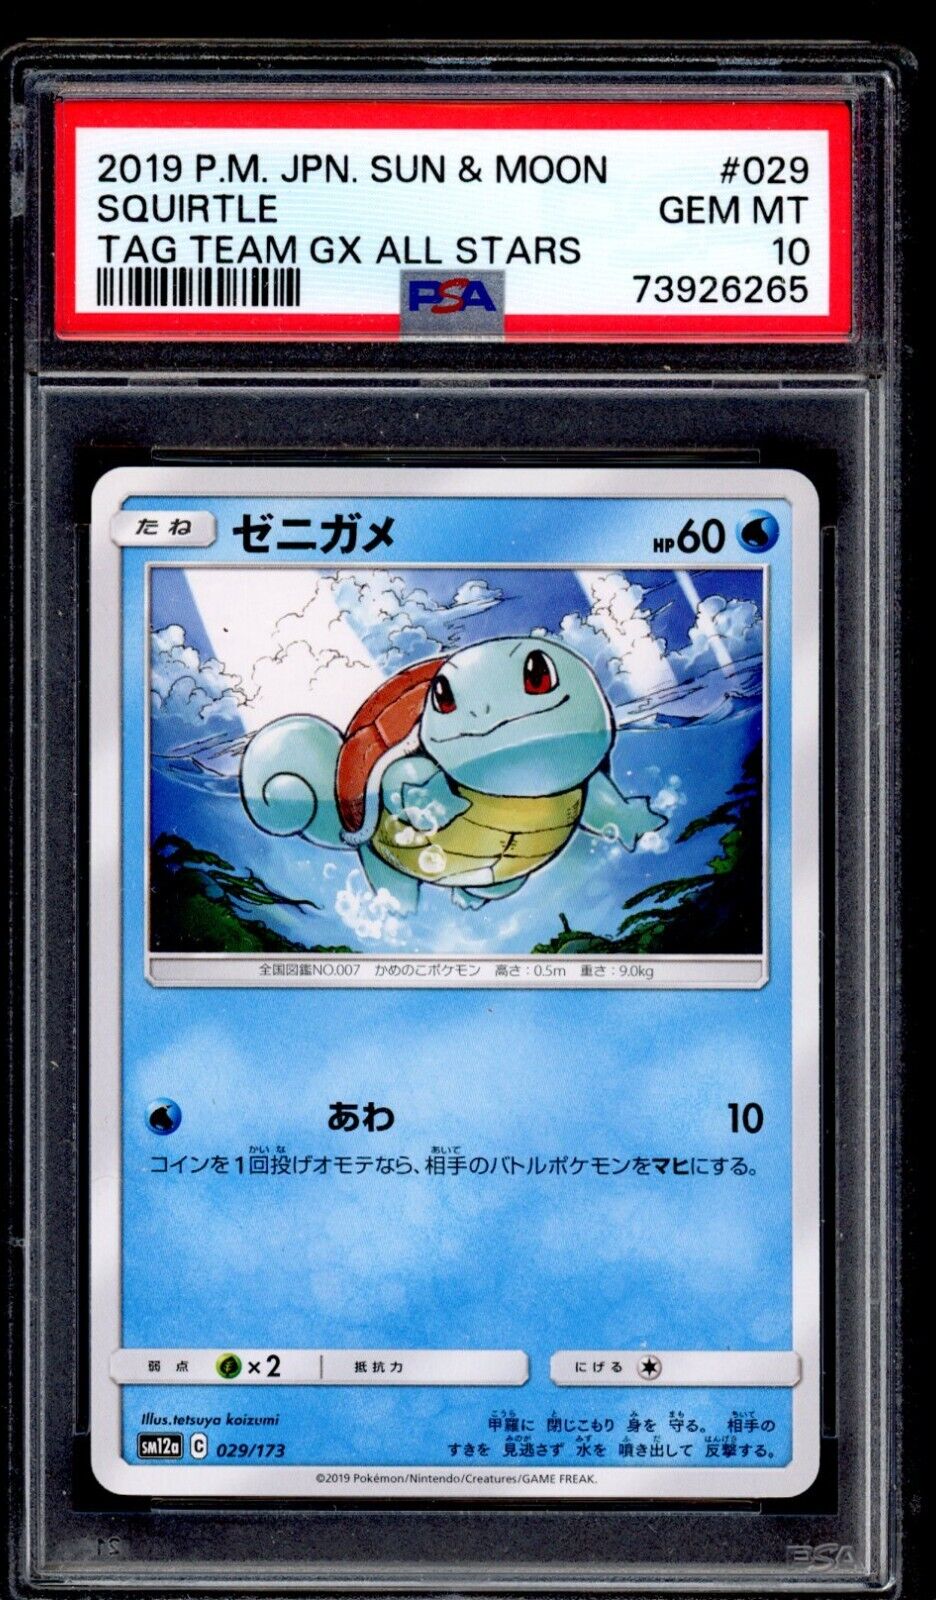 PSA 10 Squirtle 2019 Pokemon Card 029/173 Tag Team GX All Stars